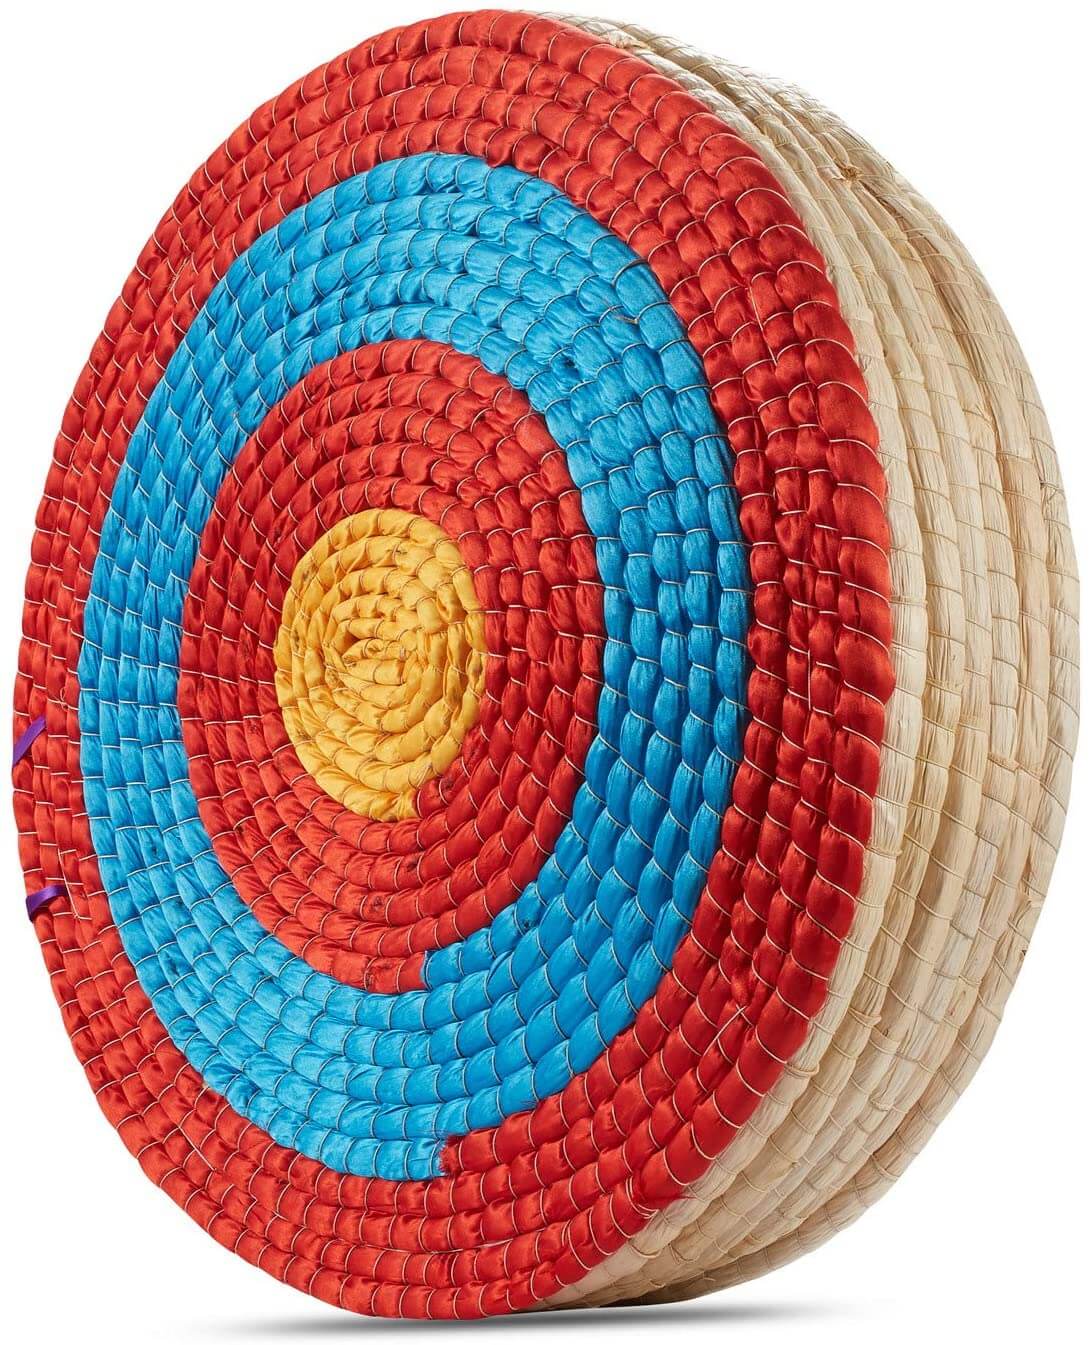 Traditional Hand-Made Straw Archery Target